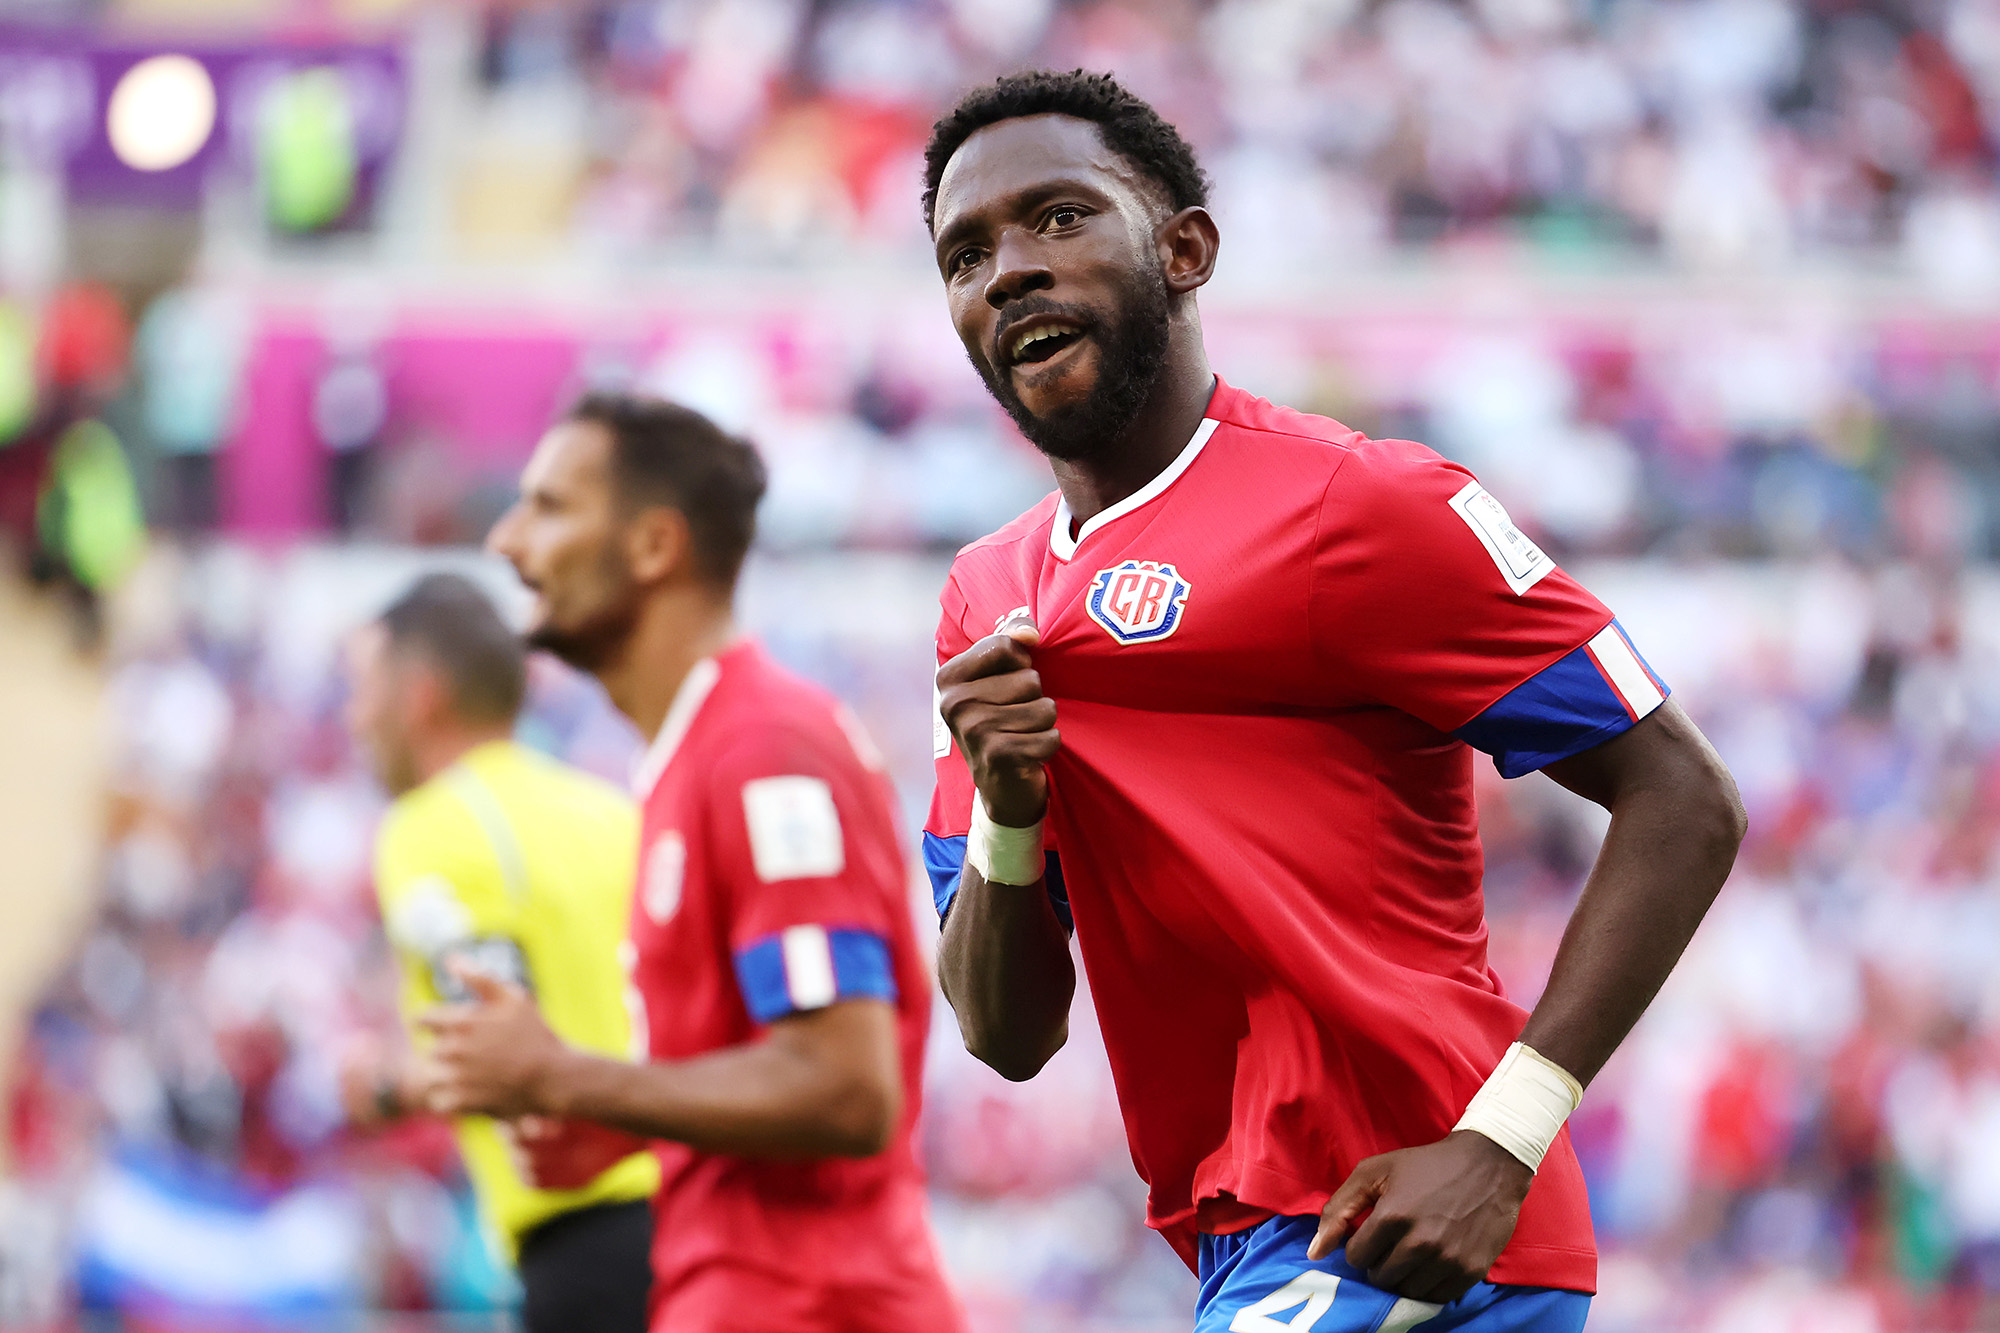 Keysher Fuller of Costa Rica celebrates after scoring their team's first goal during the FIFA World Cup Qatar 2022 Group E match between Japan and Costa Rica at Ahmad Bin Ali Stadium on November 27.